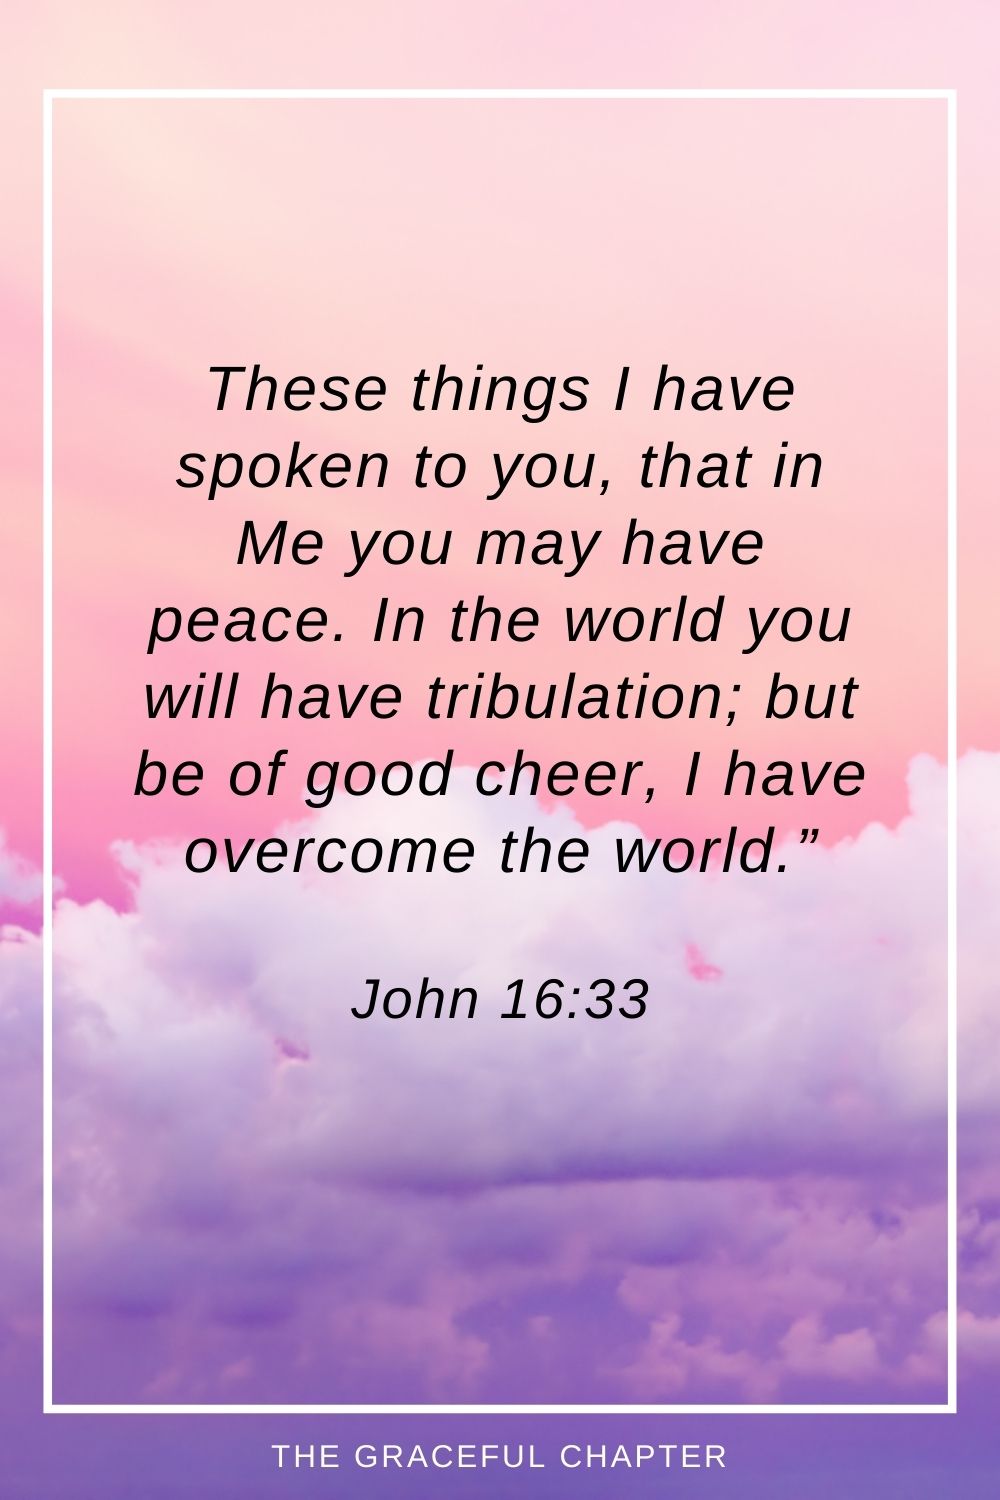 These things I have spoken to you, that in Me you may have peace. In the world you will have tribulation; but be of good cheer, I have overcome the world.” John 16:33